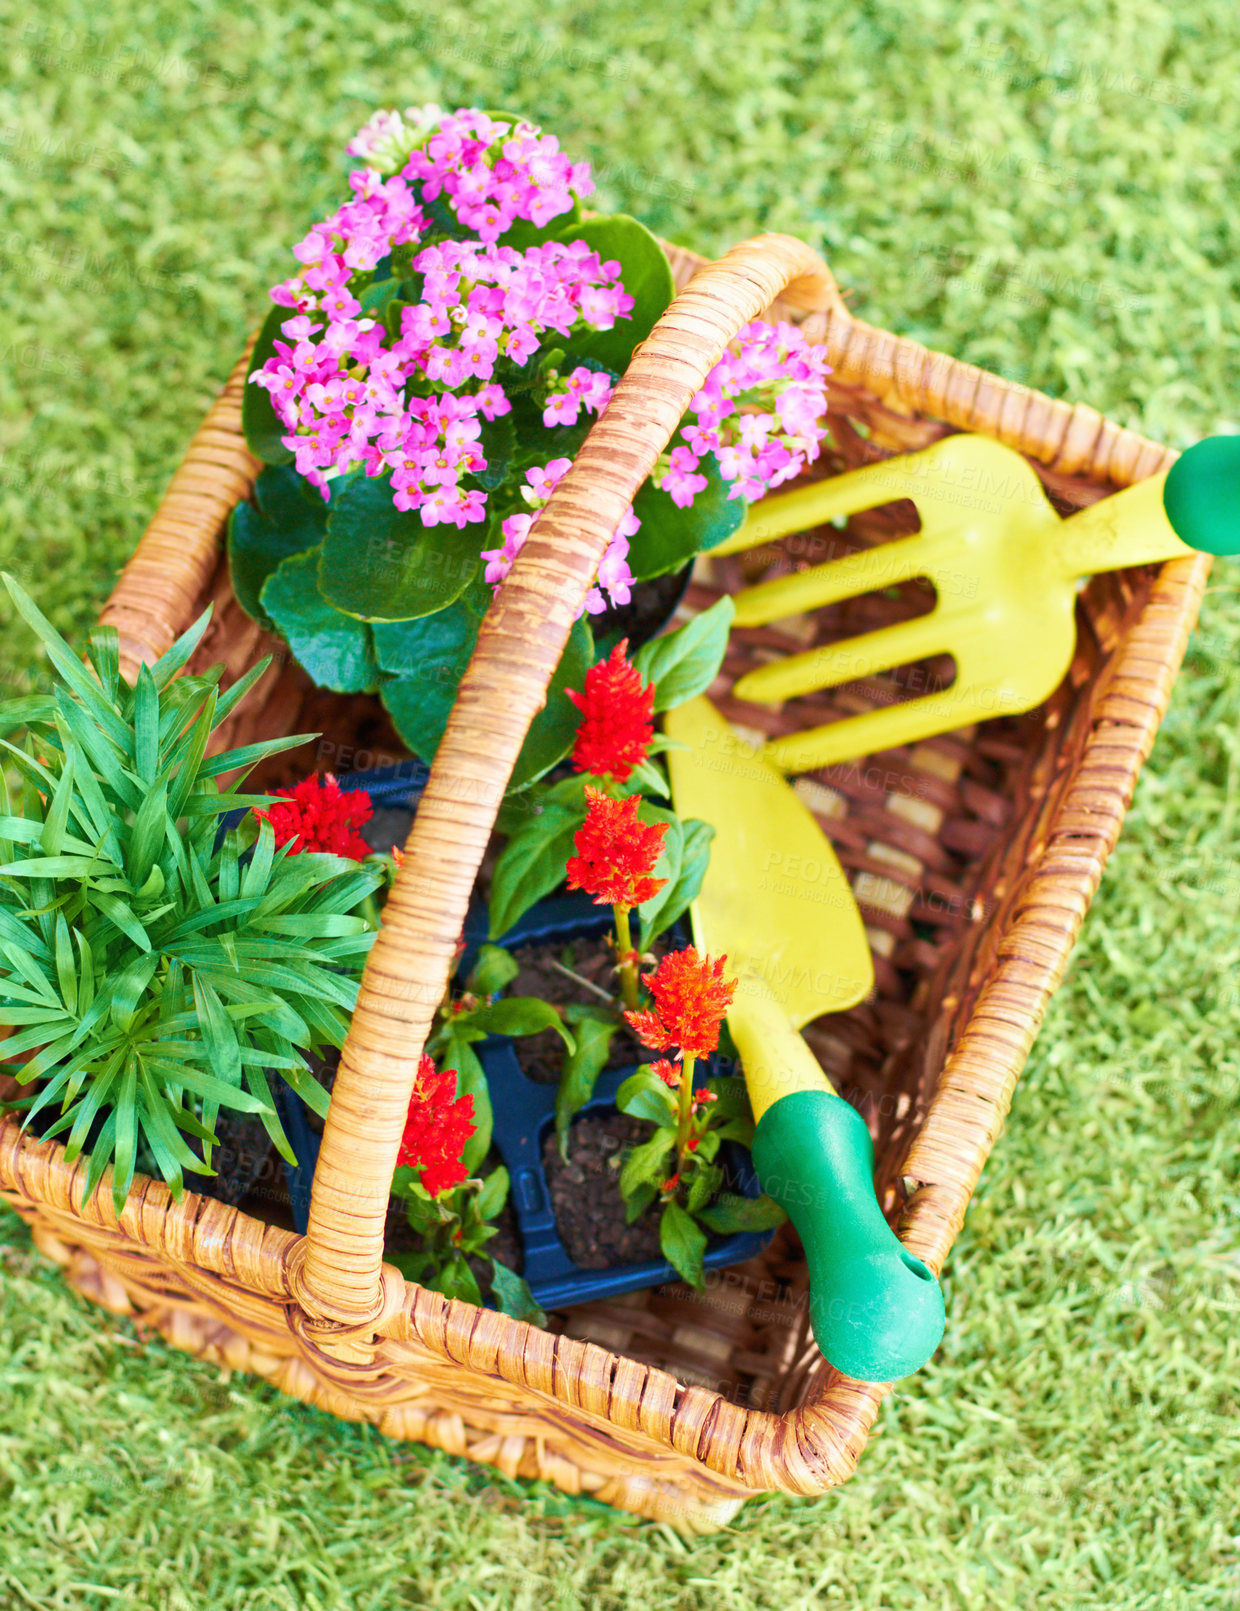 Buy stock photo Gardening, above and a basket with flowers and tools for backyard landscaping and lawn design. Spring, horticulture and a collection of plants and equipment for creativity in nature and environment